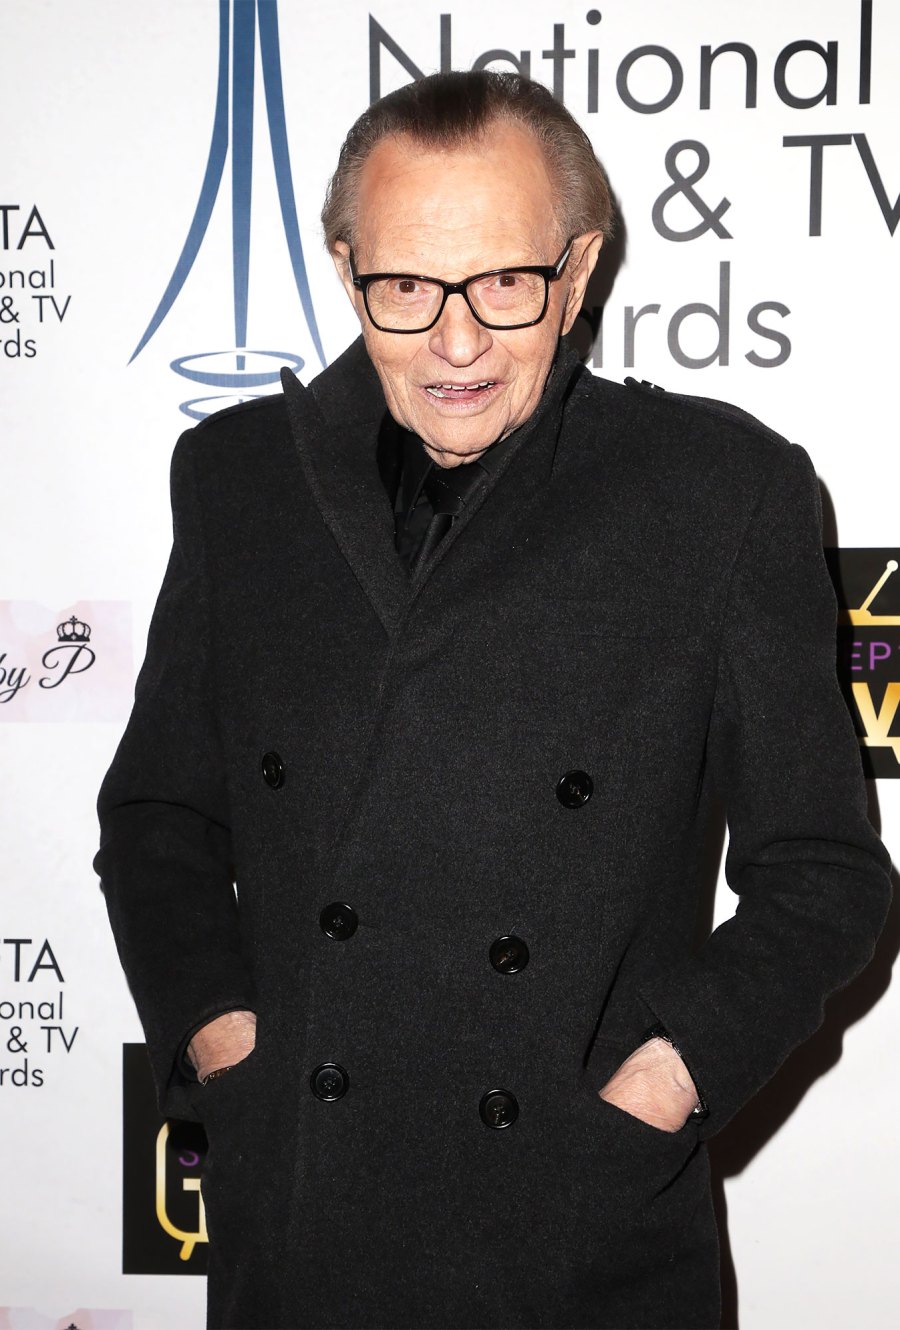 Celebrities-Who-Have-Been-Married-Three-Times-or-More-Larry-King.jpg